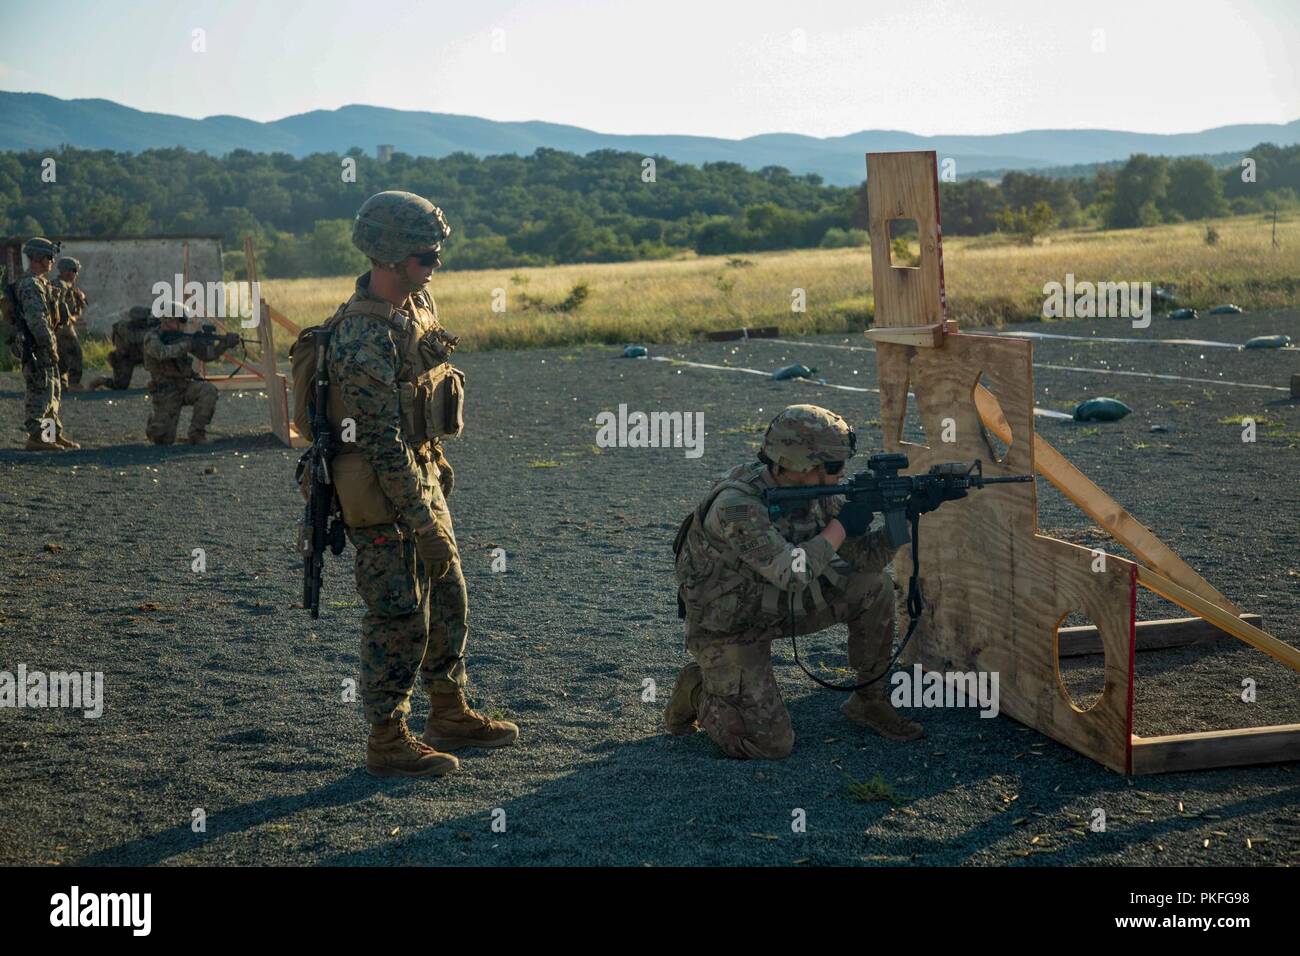 U.S. Marines with Black Sea Rotational Force 18.1 supervise U.S. Army soldiers executing an advanced portion of a Combat Marksmanship Program range during Exercise Platinum Lion 18 at Novo Selo Training Area, Bulgaria, Aug. 5, 2018. Platinum Lion is an annual field training exercise that reinforces relationships in a joint training environment, builds understanding of partner nation tactics, techniques and procedures, and increases interoperability with Allied and partner forces. Stock Photo